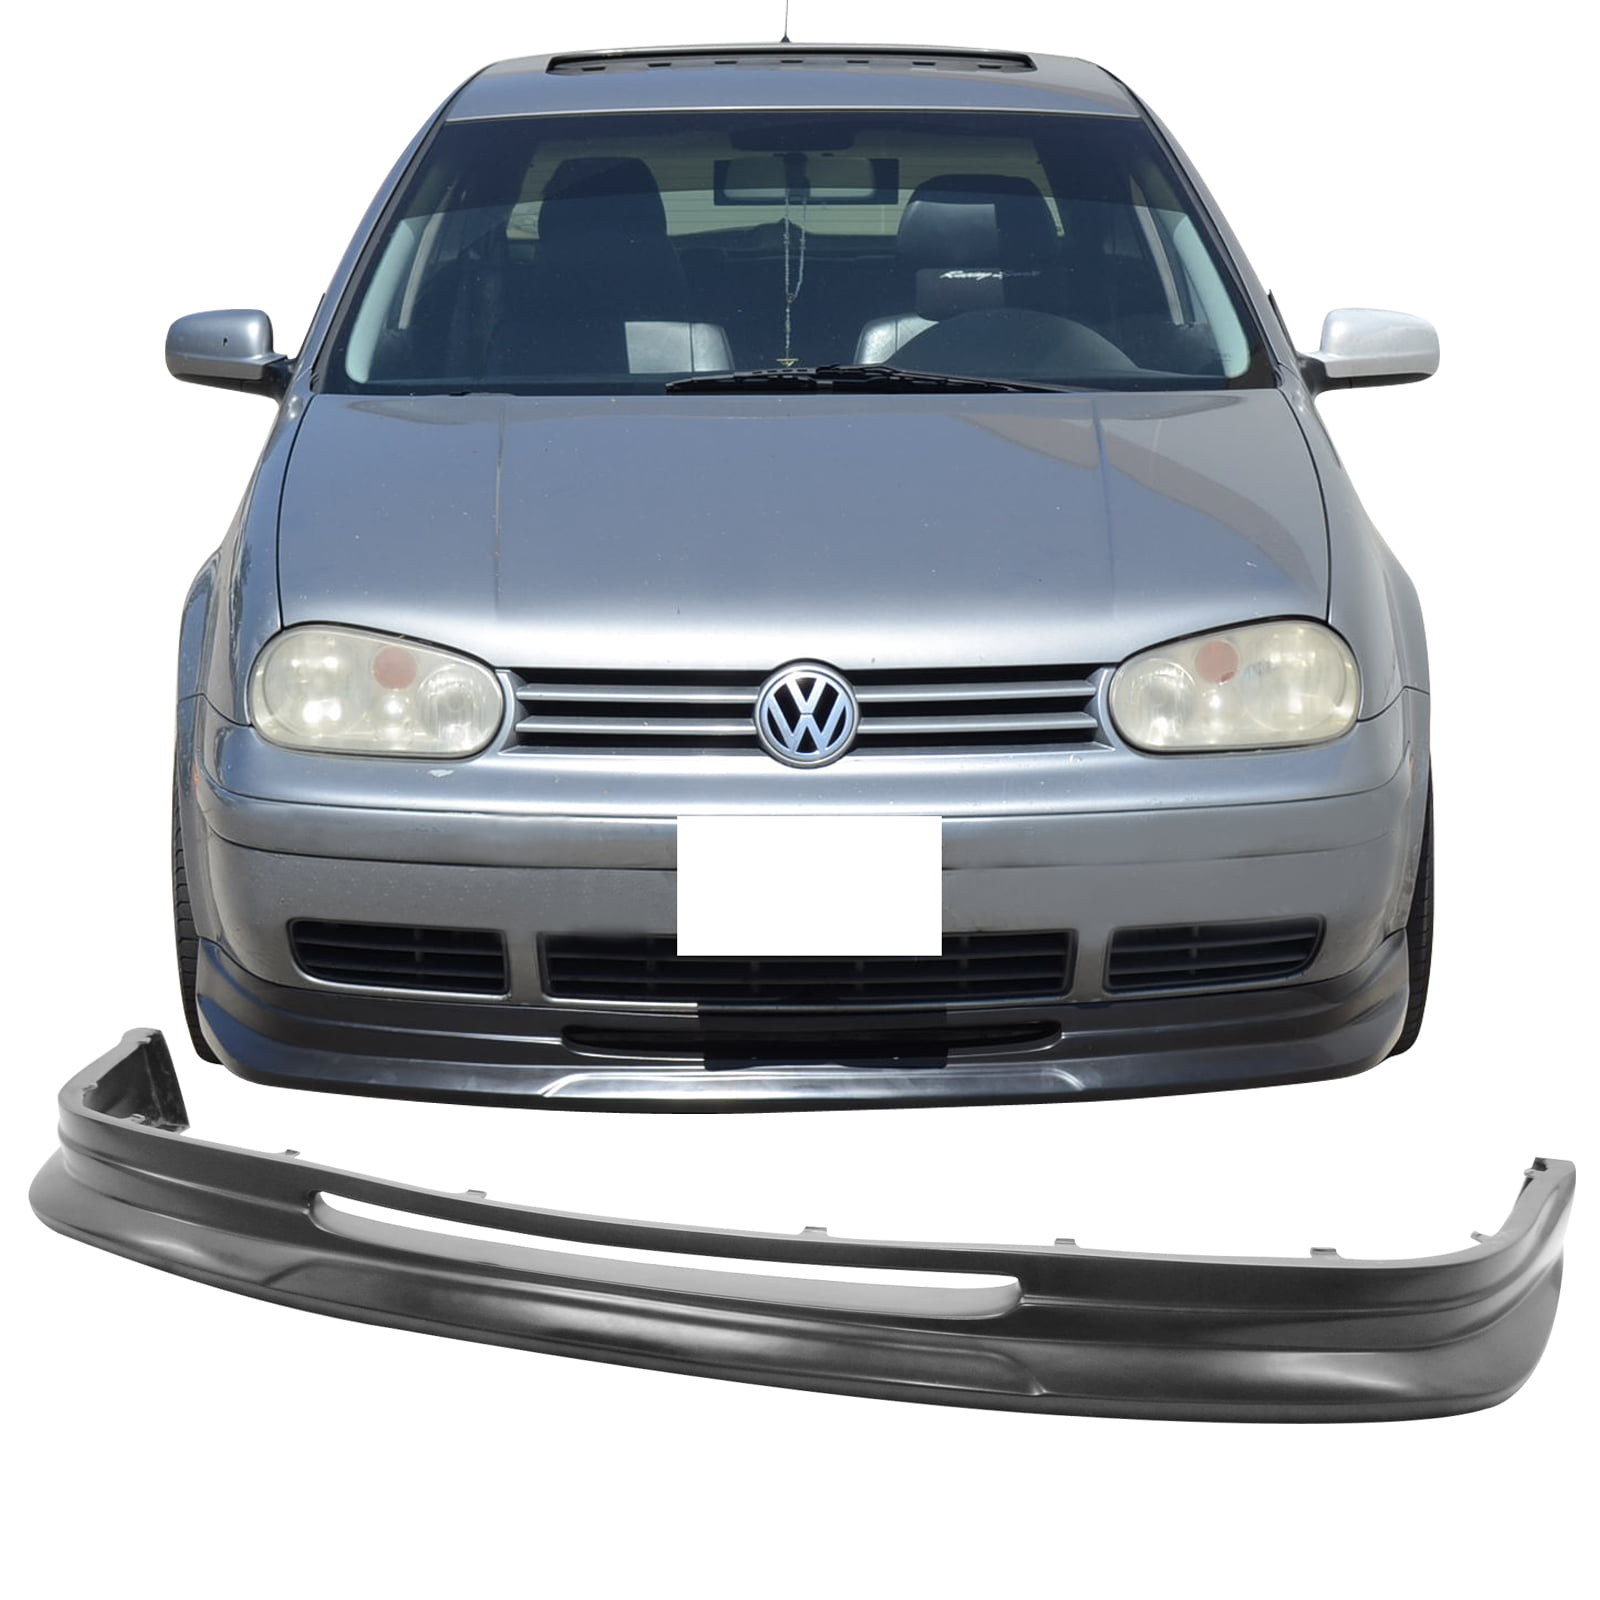 Volkswagen GTI Non Lined A6 Notebook VW Genuine accessories